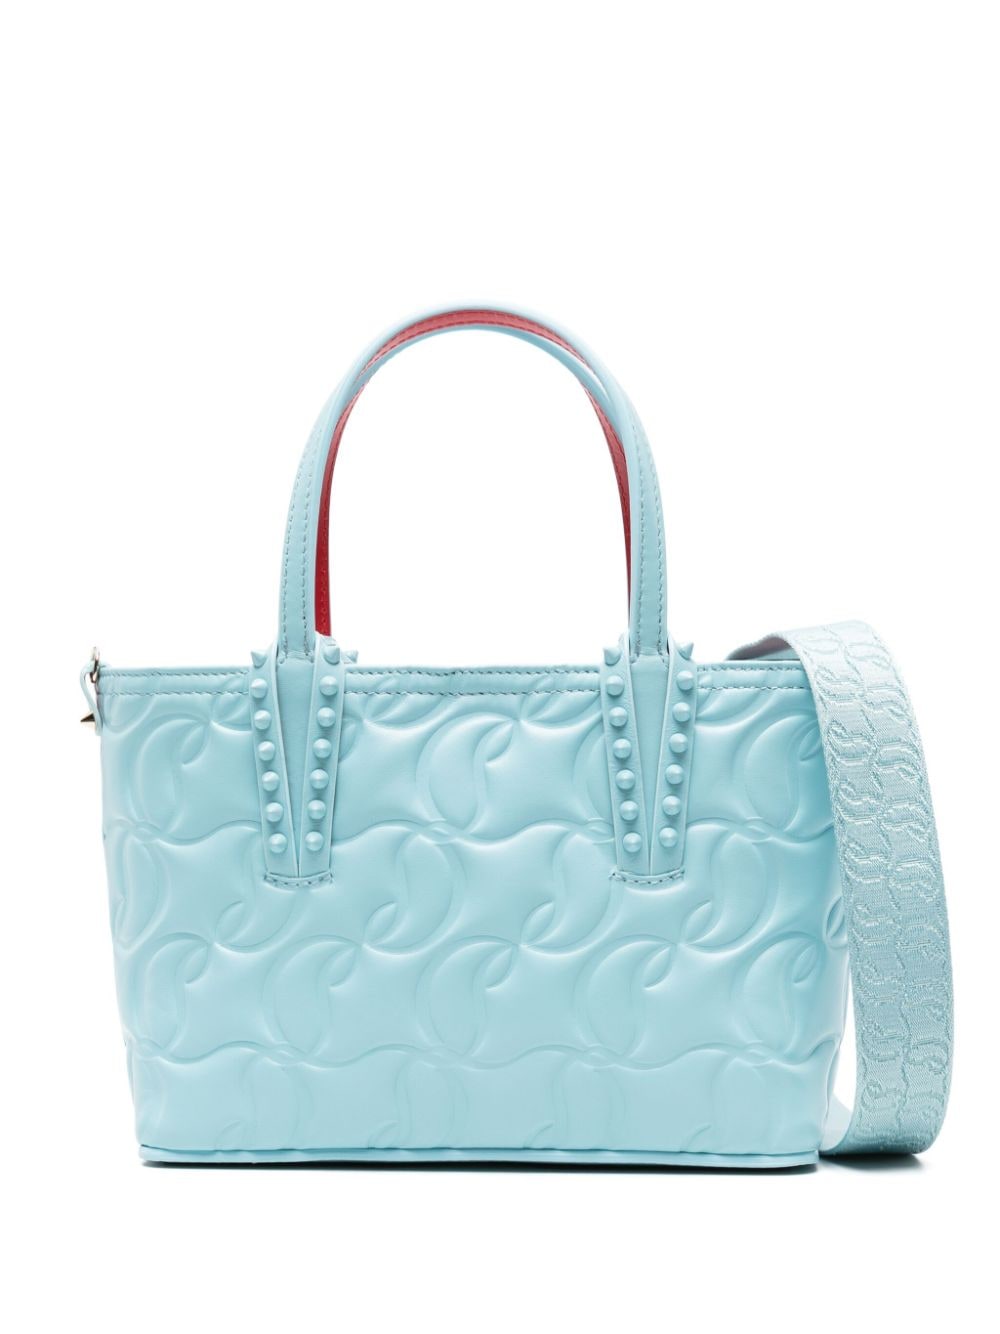 CHRISTIAN LOUBOUTIN Light Blue and Red Leather Handbag with All-Over Debossed Logo and Tonal Spike Stud Detailing